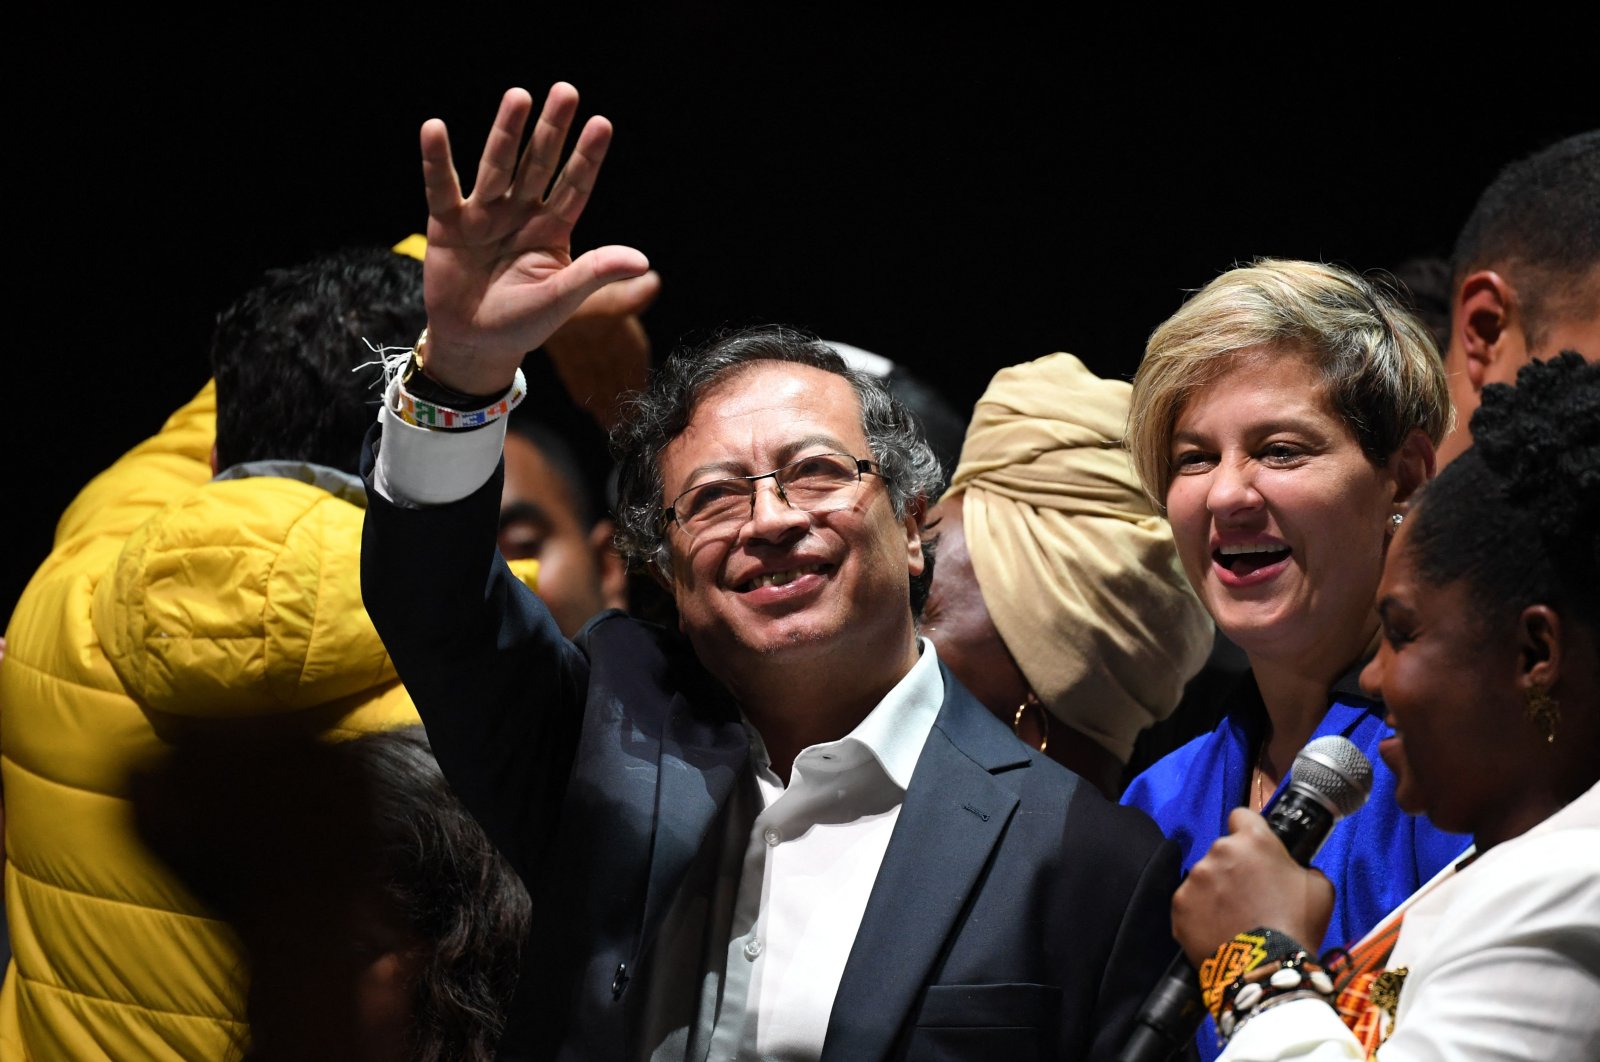 Newly elected Colombian President Gustavo Petro (C) celebrates next to his wife Veronica Alcocer and his running mate Francia Marquez  at the Movistar Arena in  Bogota, Colombia, June 19, 2022. (AFP Photo)